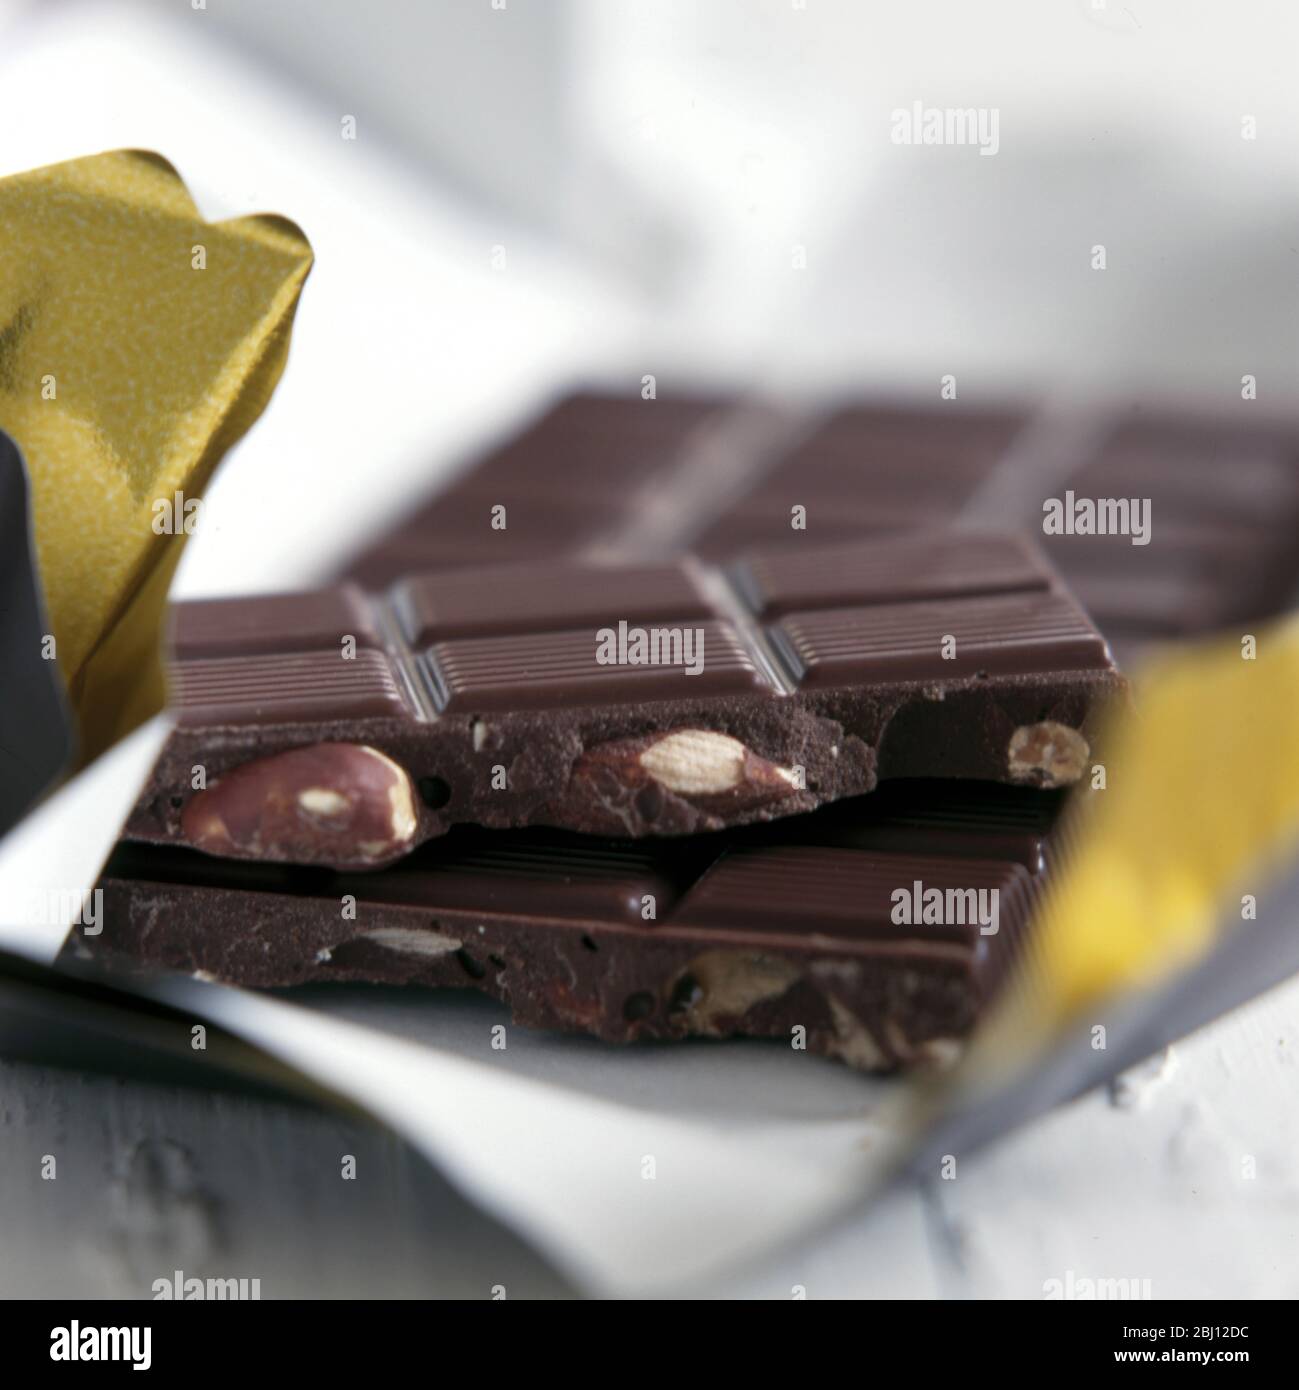 Chocolate almond nut bar broken and sitting on wrapping - Stock Photo